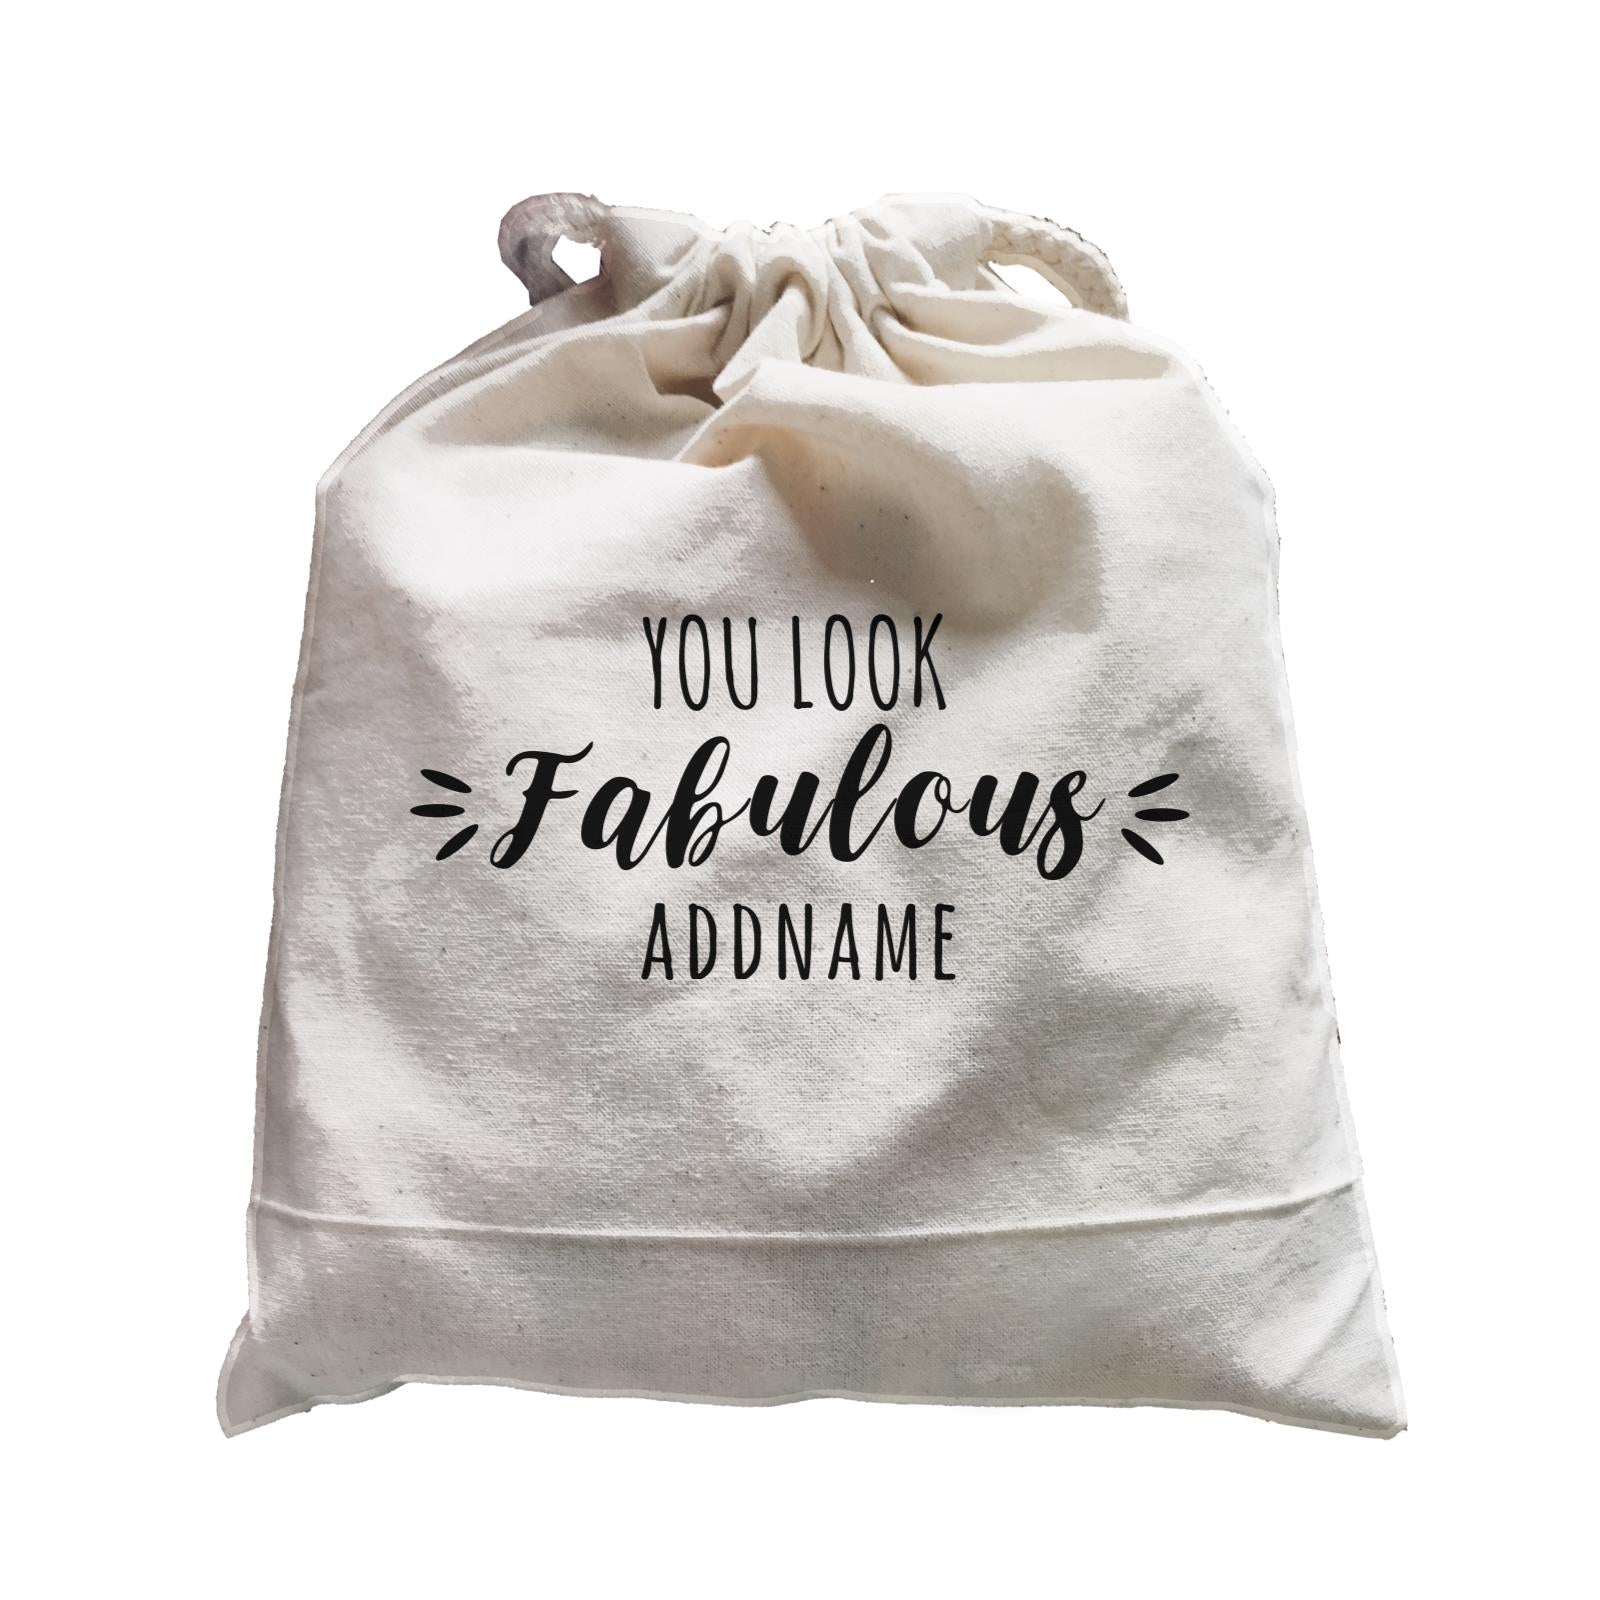 Best Friends Quotes You Look Fabulous Addname Satchel